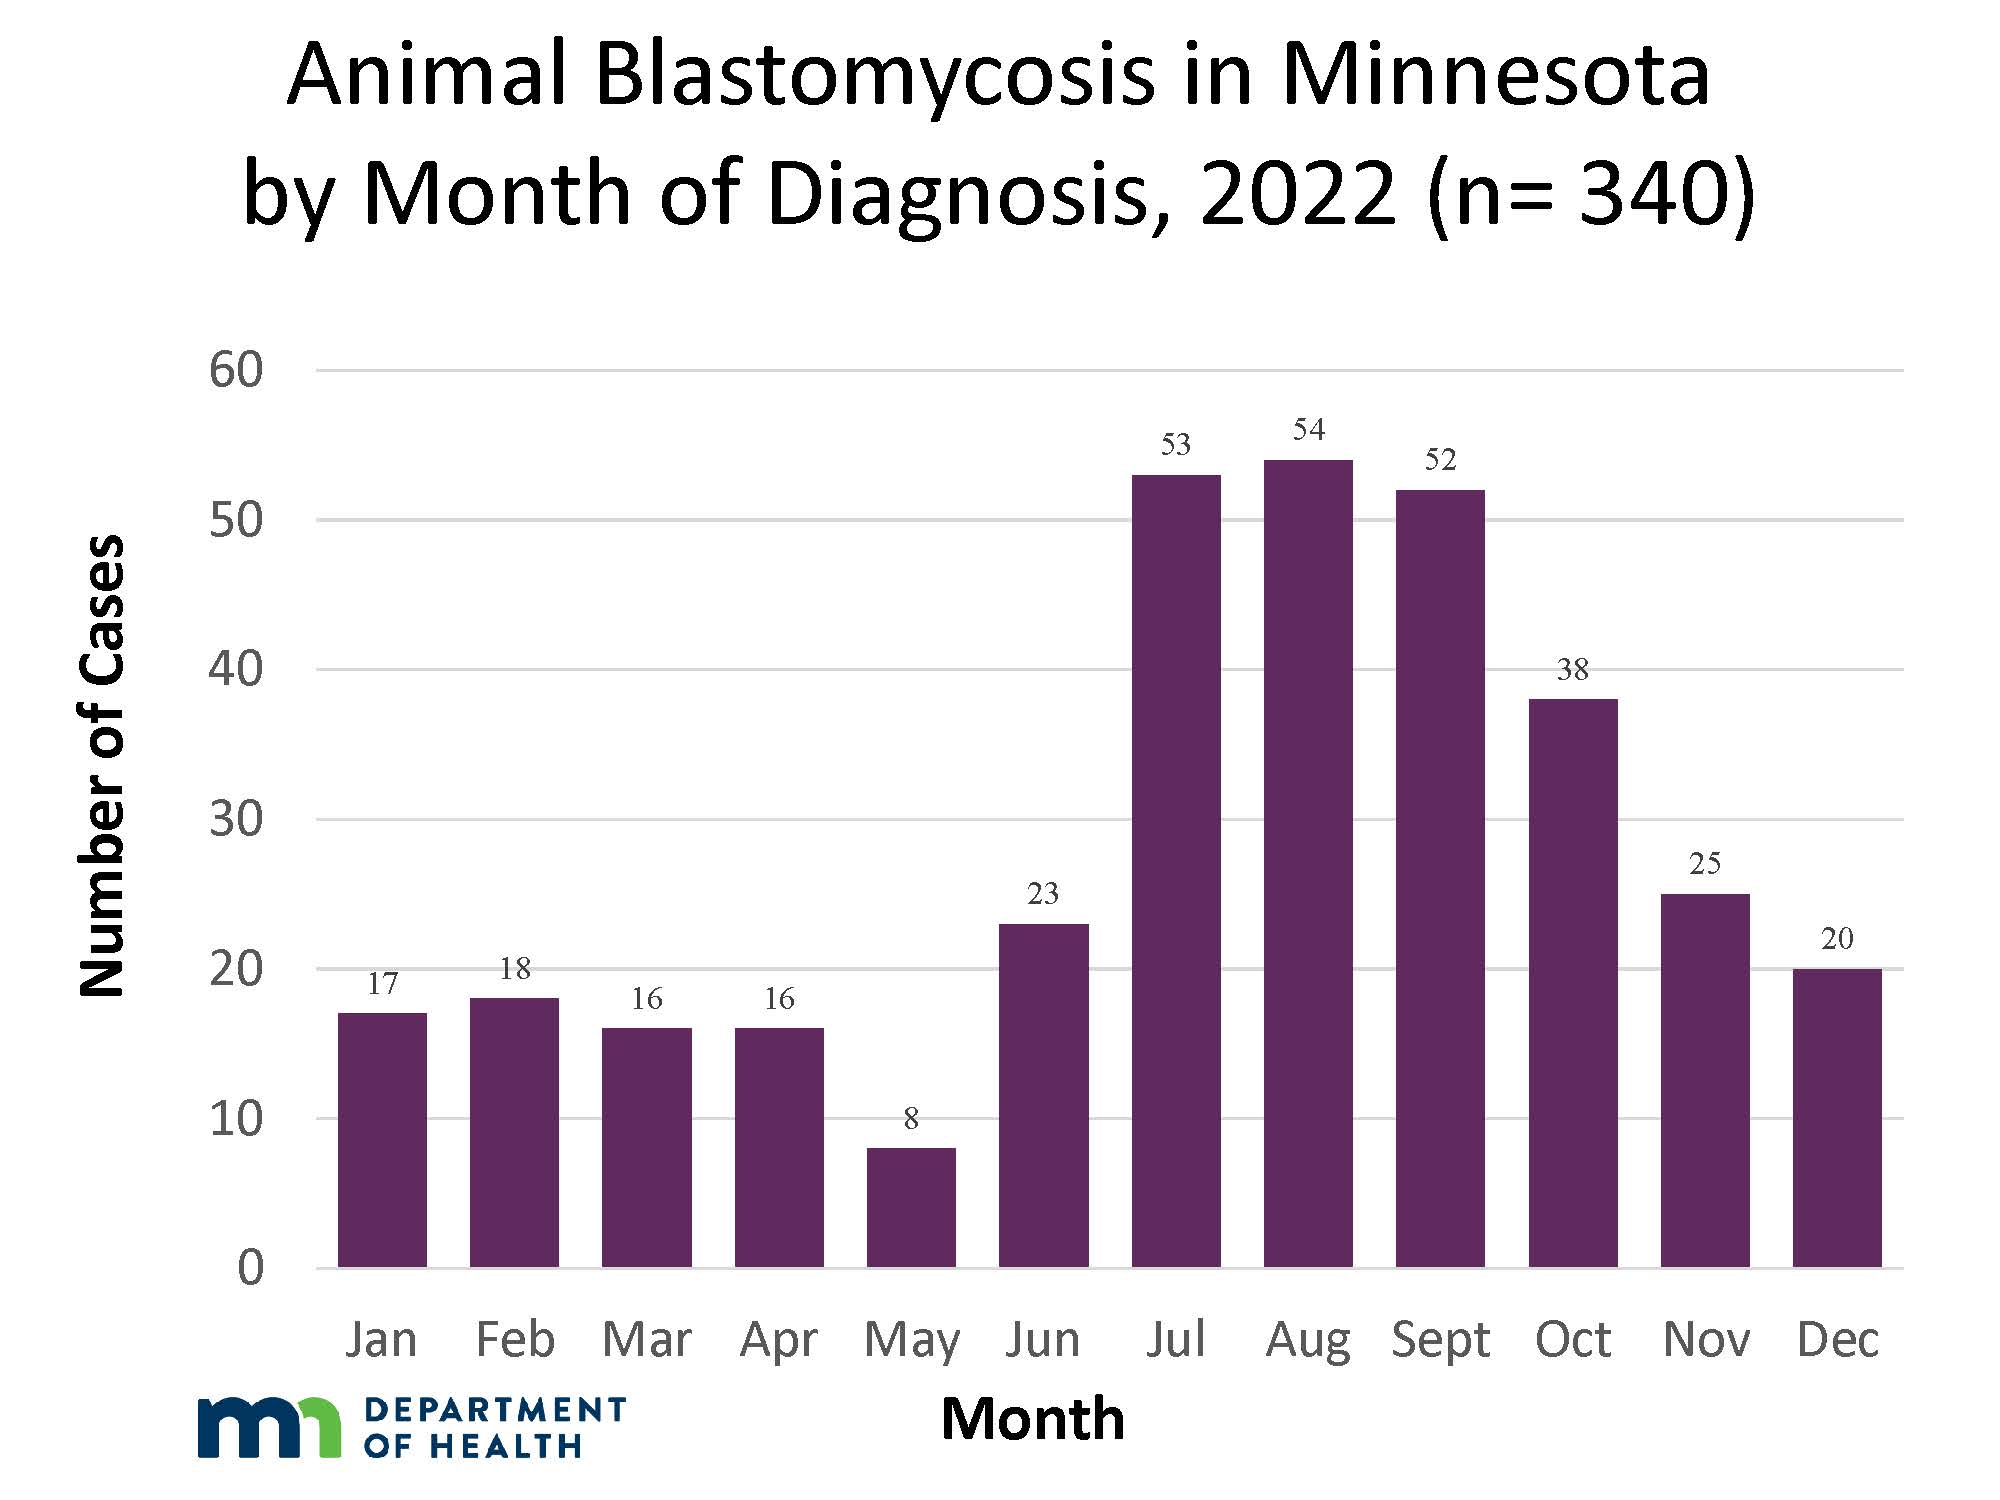 Graph of Animal Blastomycosis in Minnesota by Month of Diagnosis in 2022